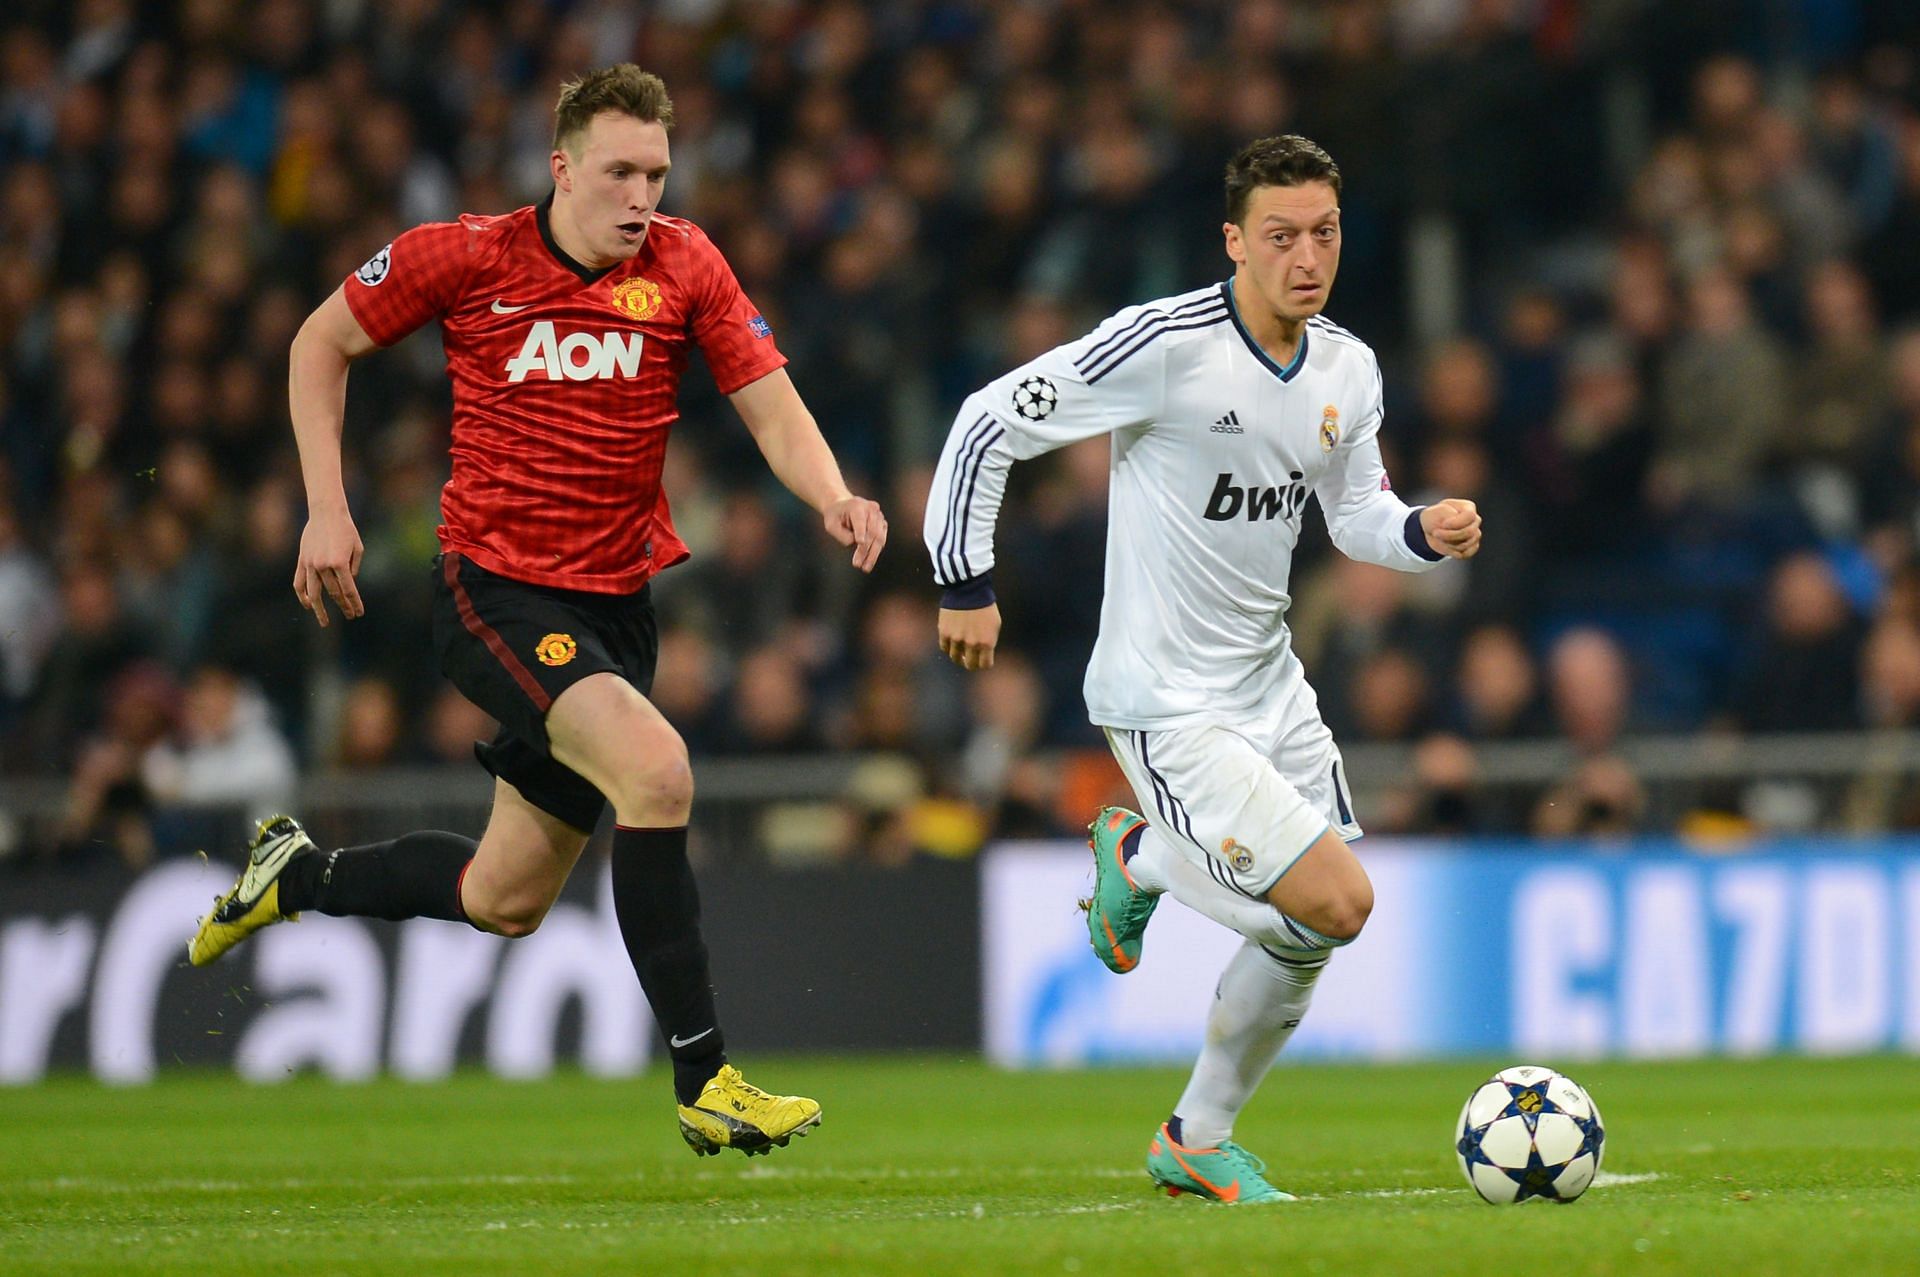 Phil Jones enjoyed some memorable moments with Manchester United.